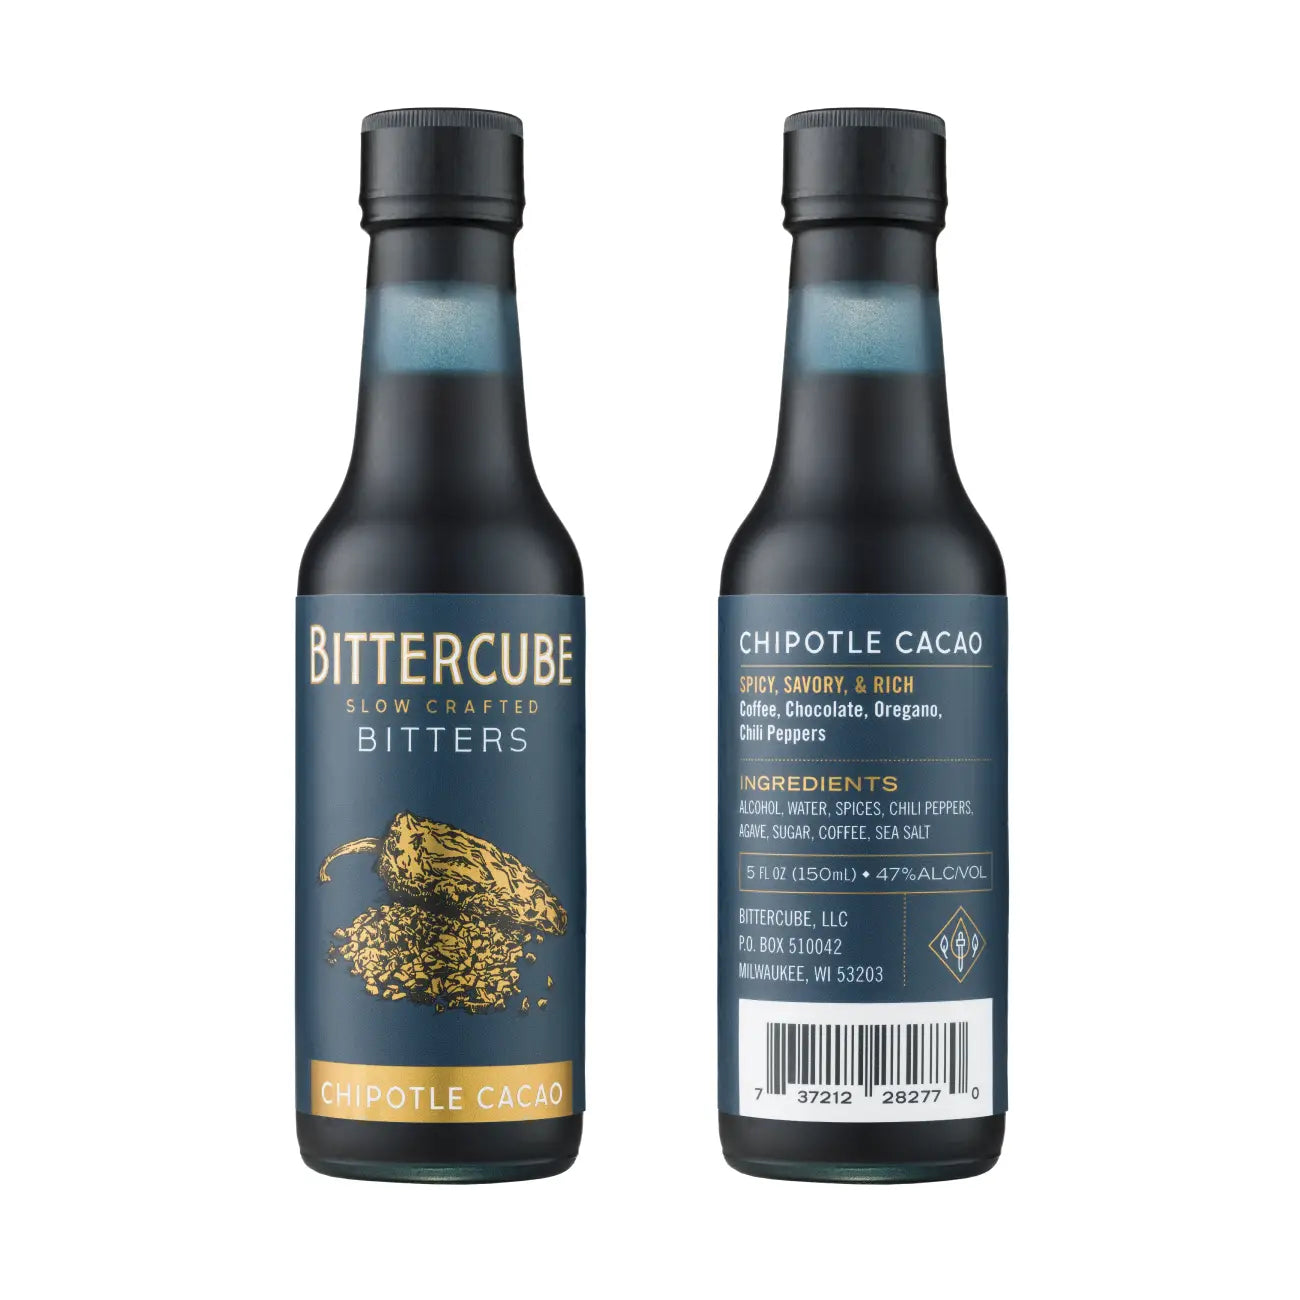 Bittercube - Chipotle Cacao Bitters